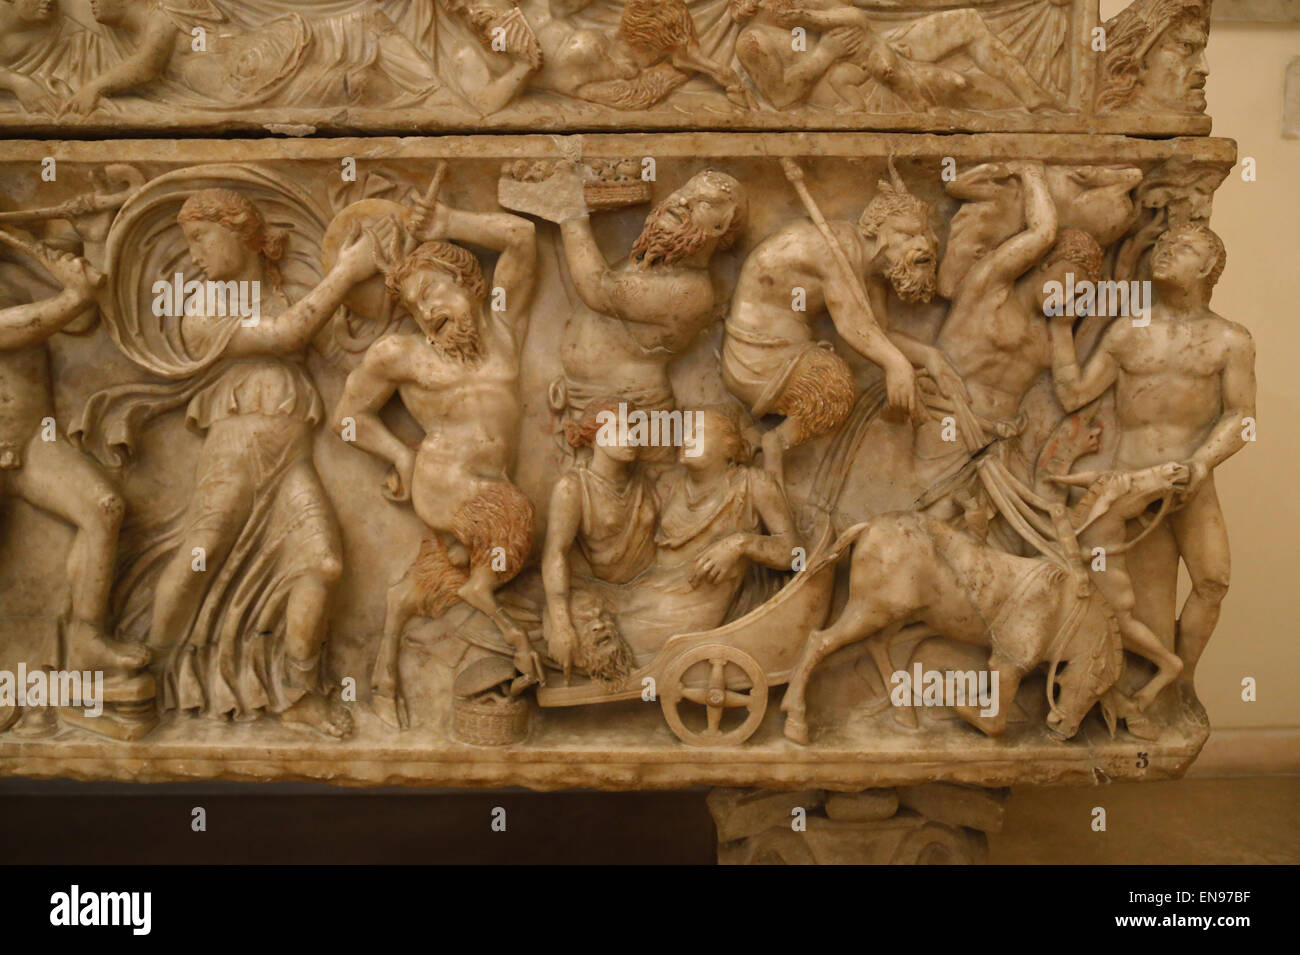 Roman art. Sarcophagus with Dionysian procession. Satyrs nad maenads. Detail. Capitoline Museums. Rome. Italy. Stock Photo